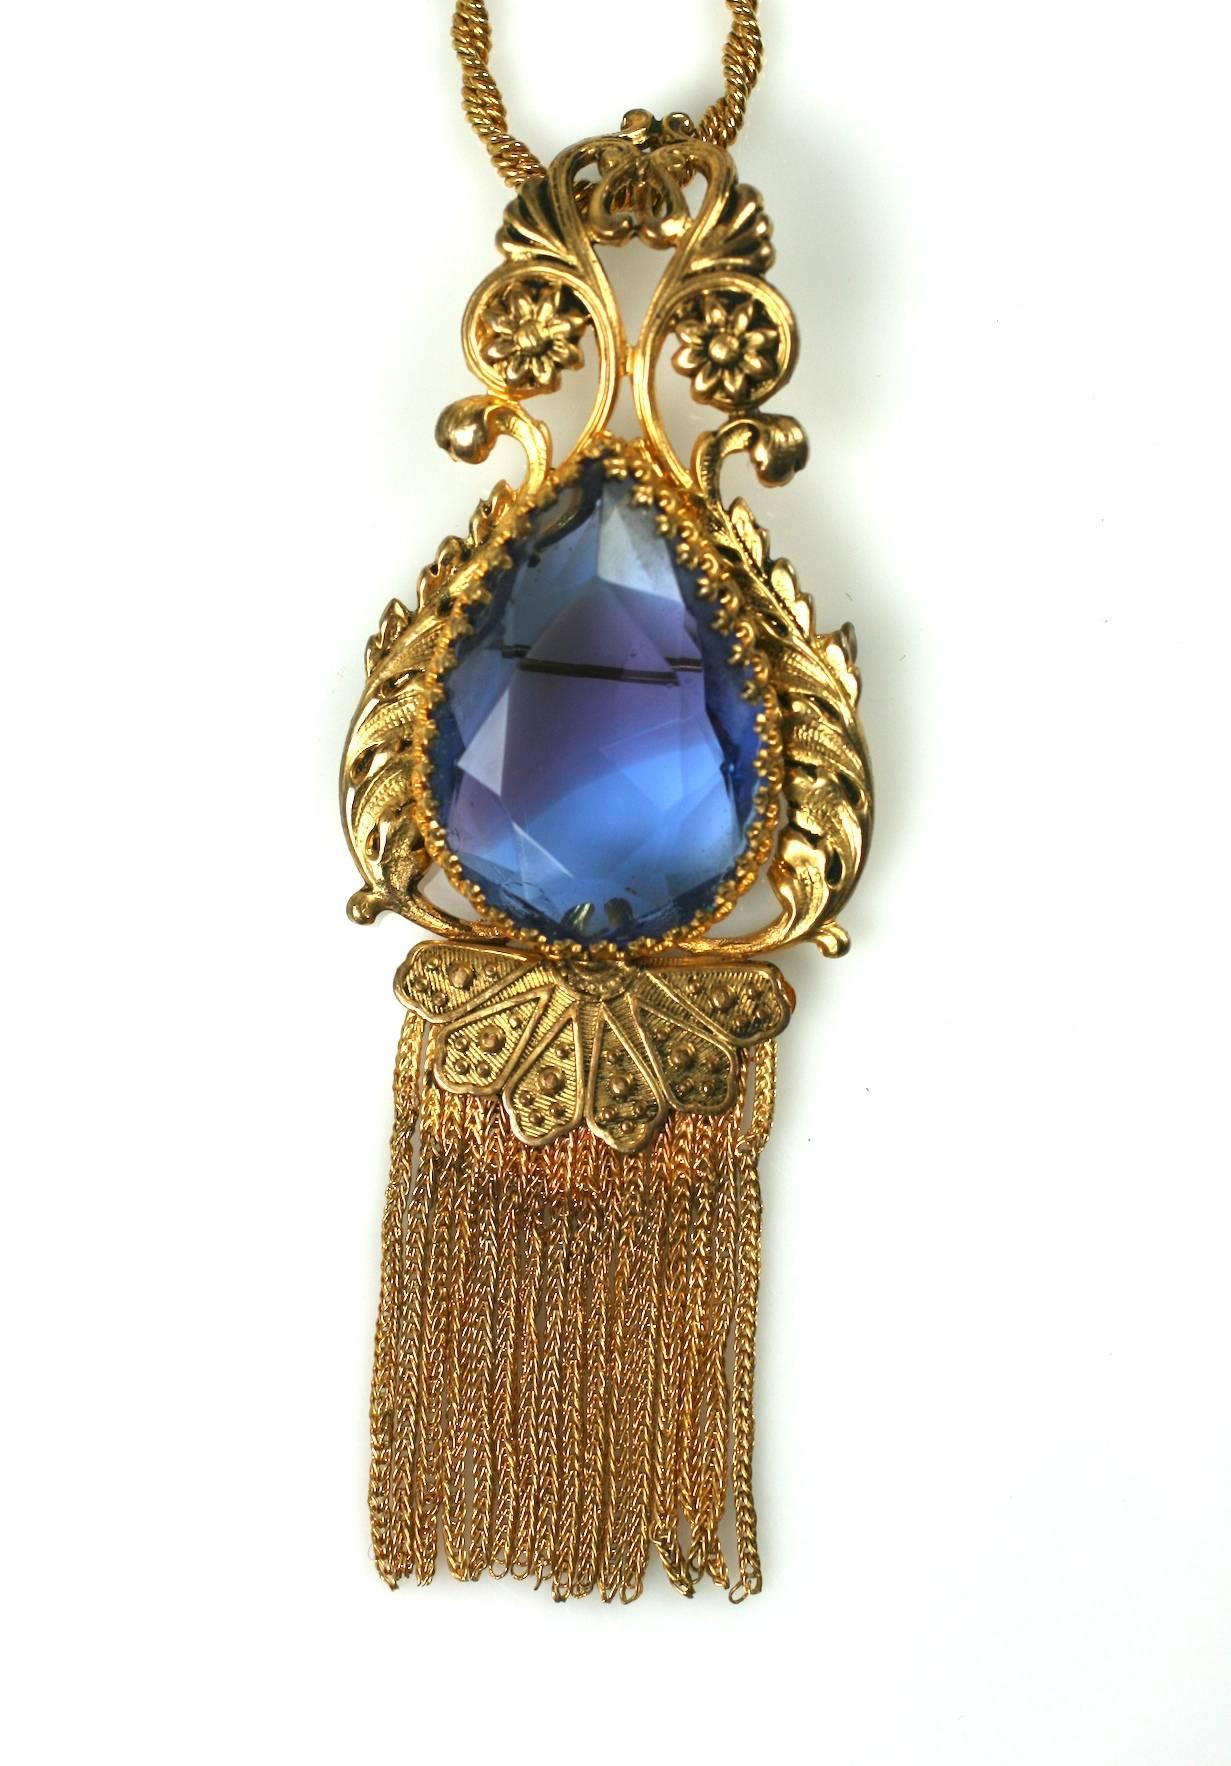 Christian Dior Haute Couture pendant brooch necklace.The large pear shaped faceted faux sapphire with central amythest zone is set in gilt filigree with fringed chain tassels. The detachable twisted gilt rope chain necklace marked France on the hook